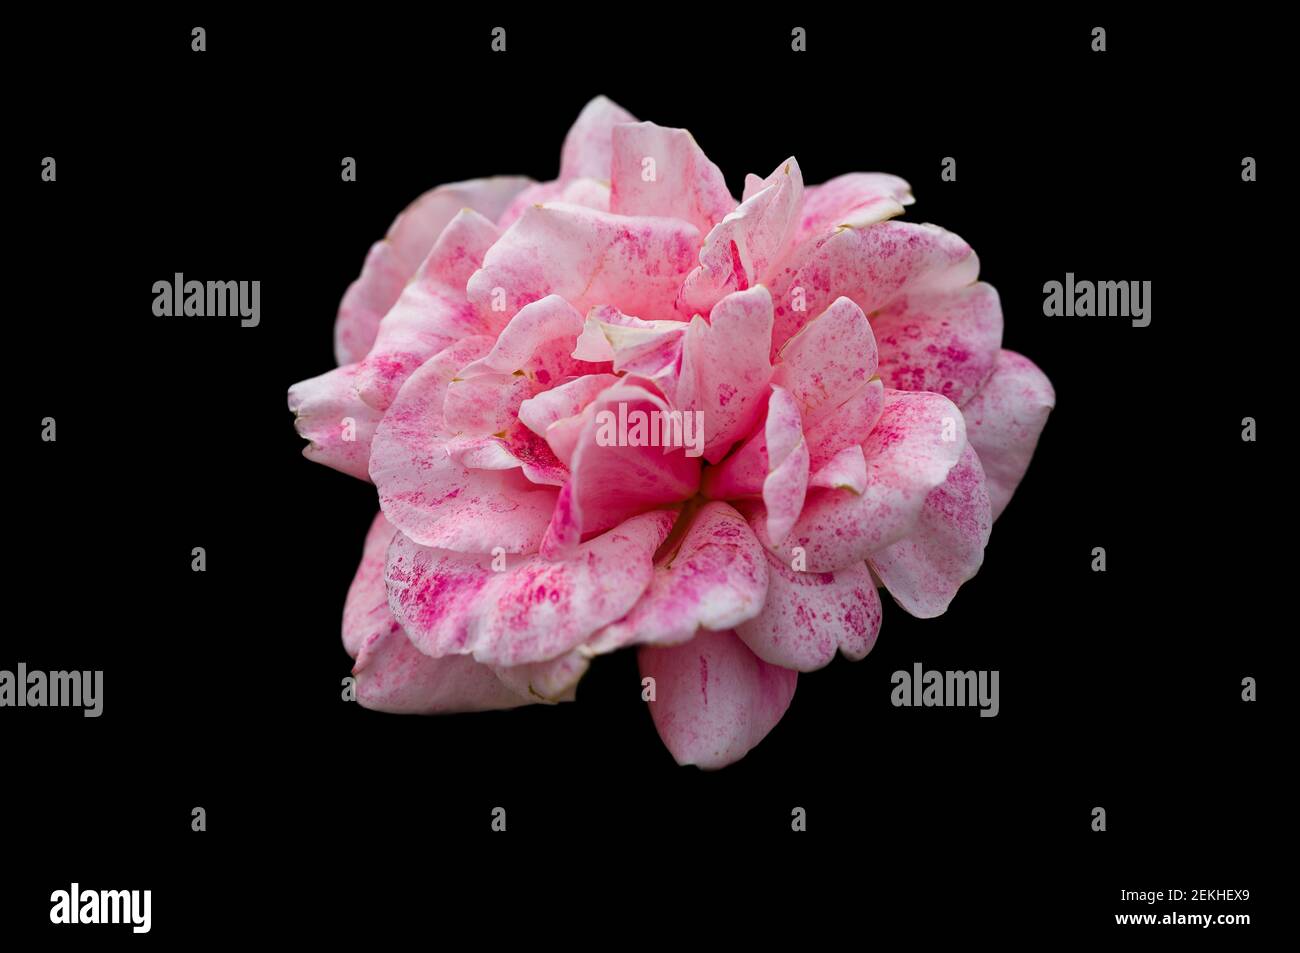 Pink and white rose flower head in black background Stock Photo